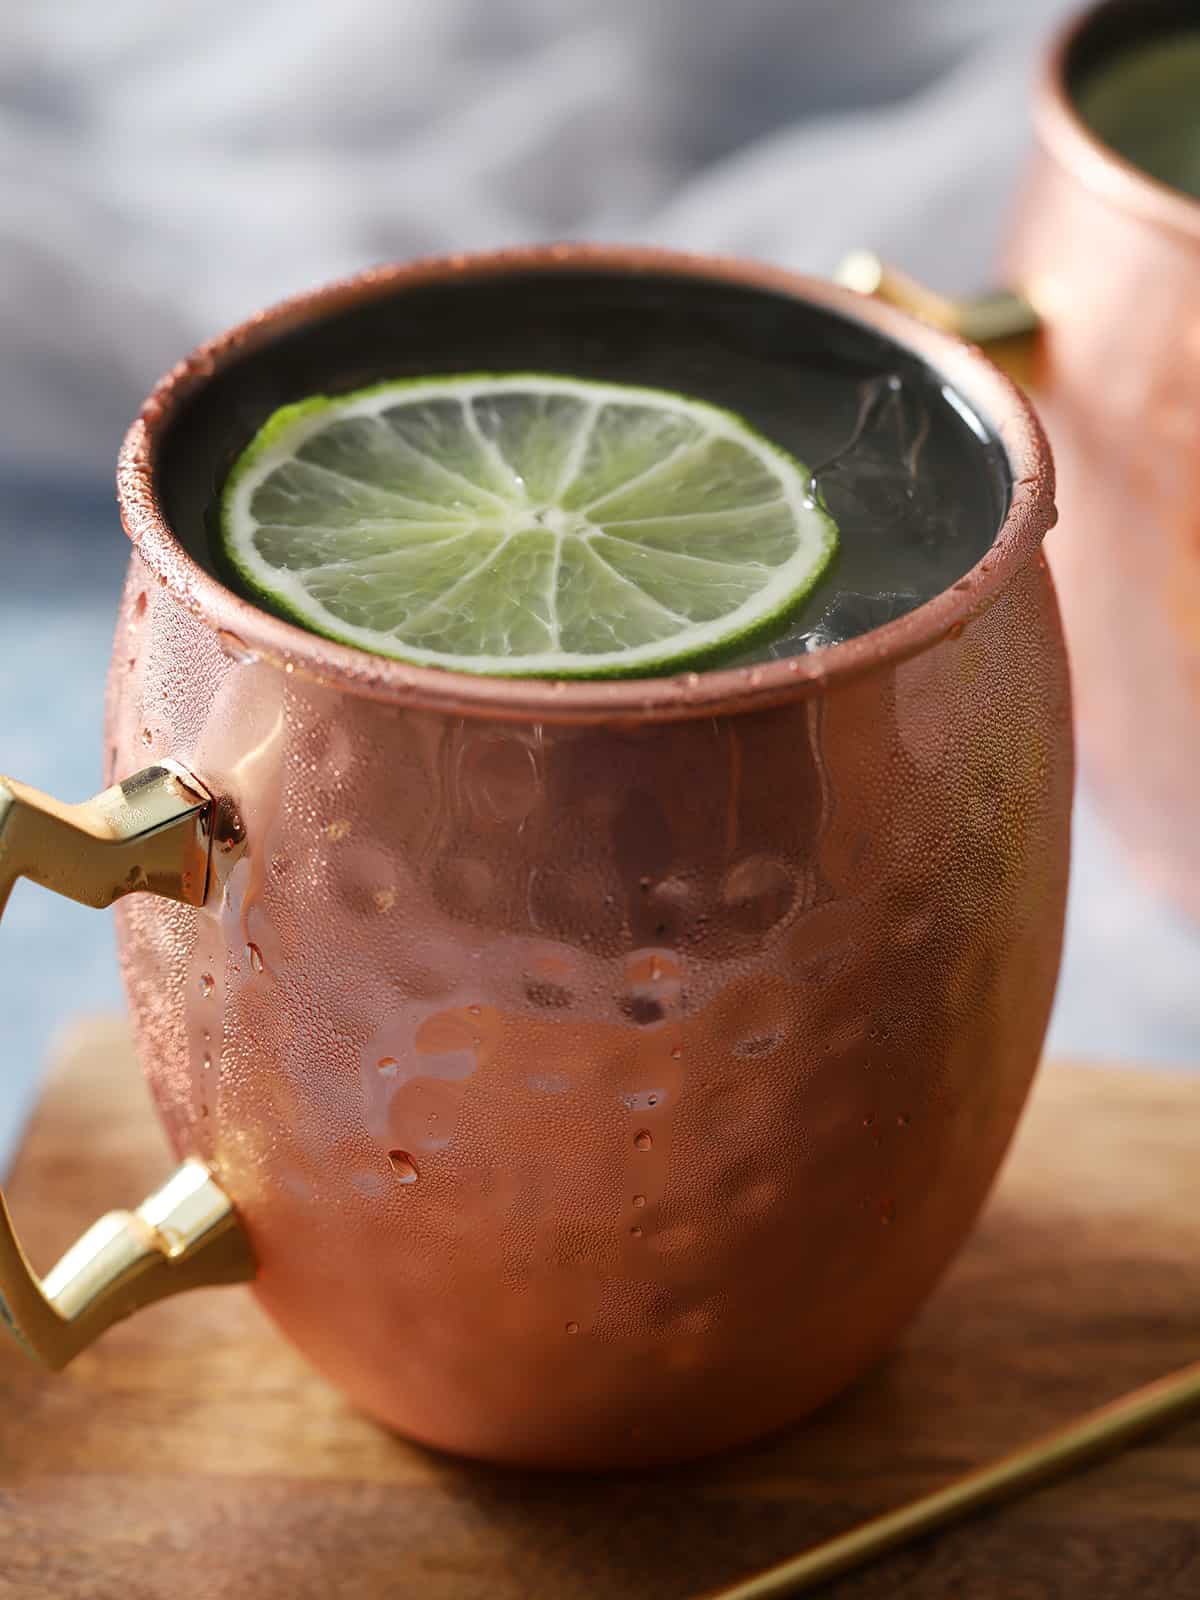 Copper mug filed with Moscow Mule cocktails.